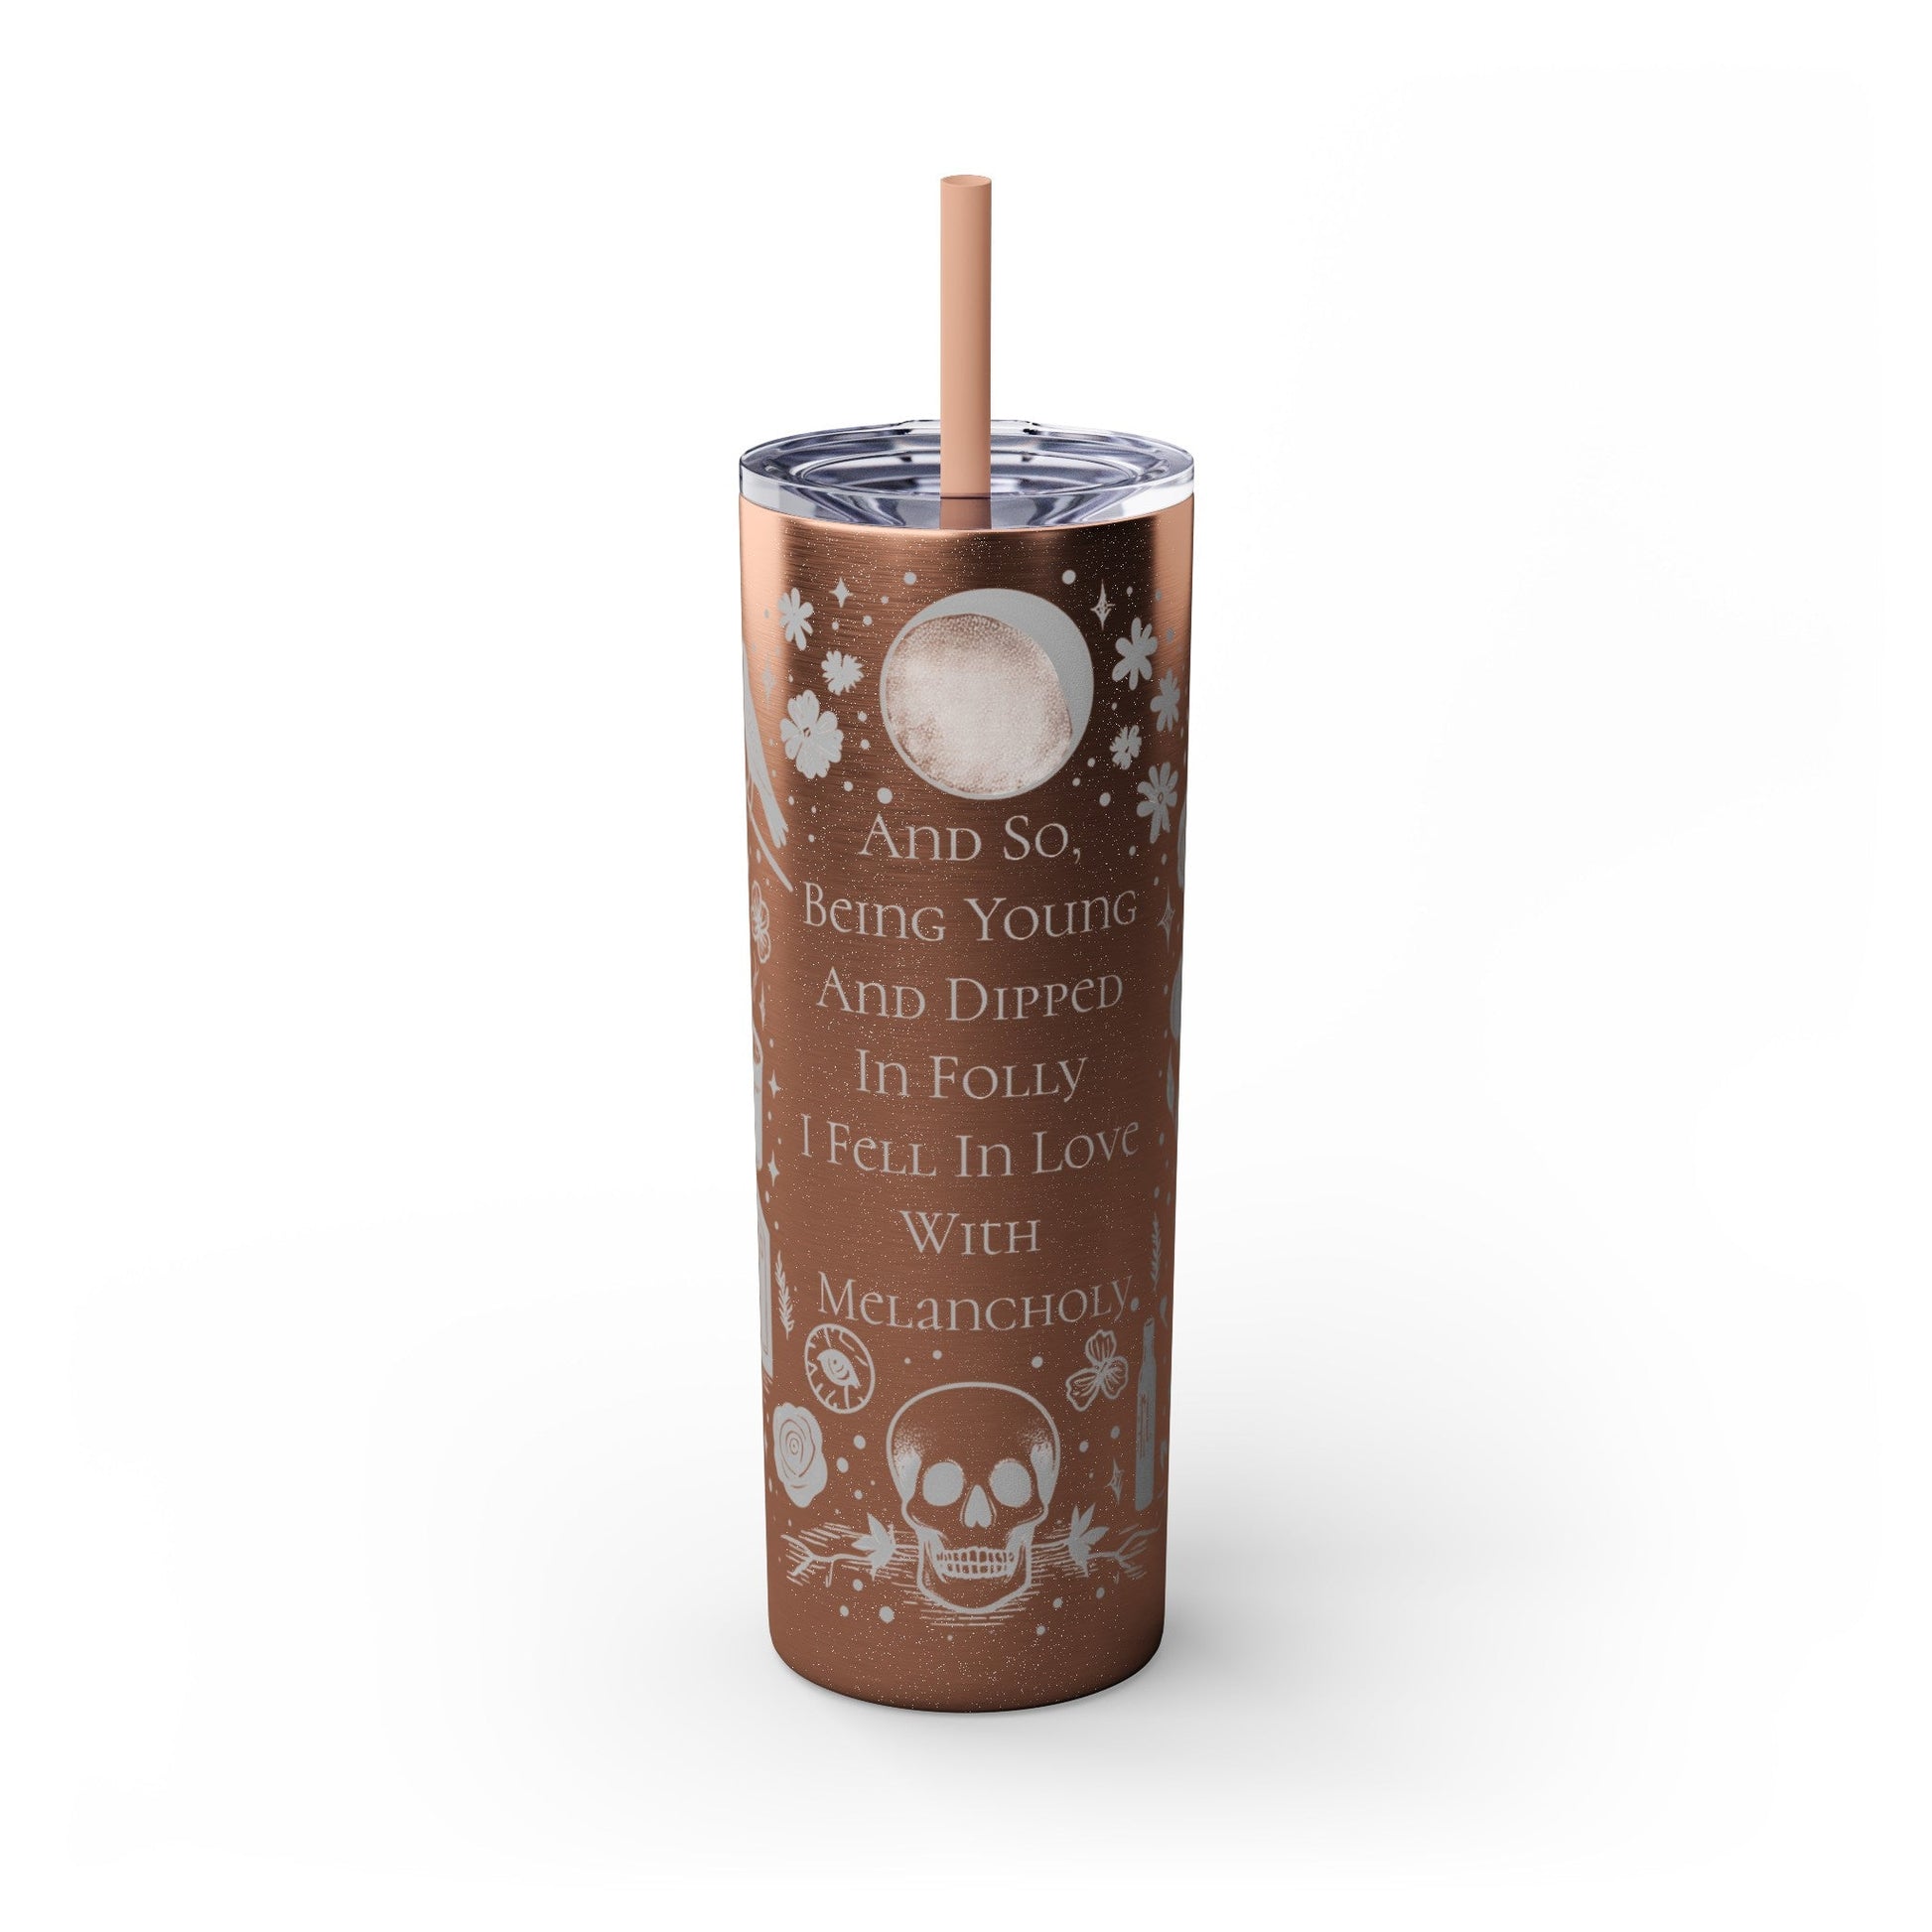 And So Being Young And Dipped In Folly I Fell In Love With Melancholy Skinny Tumbler with StrawMugVTZdesignsGlossyGlitter Rosegold20oz20 ozBottles & Tumblerscup